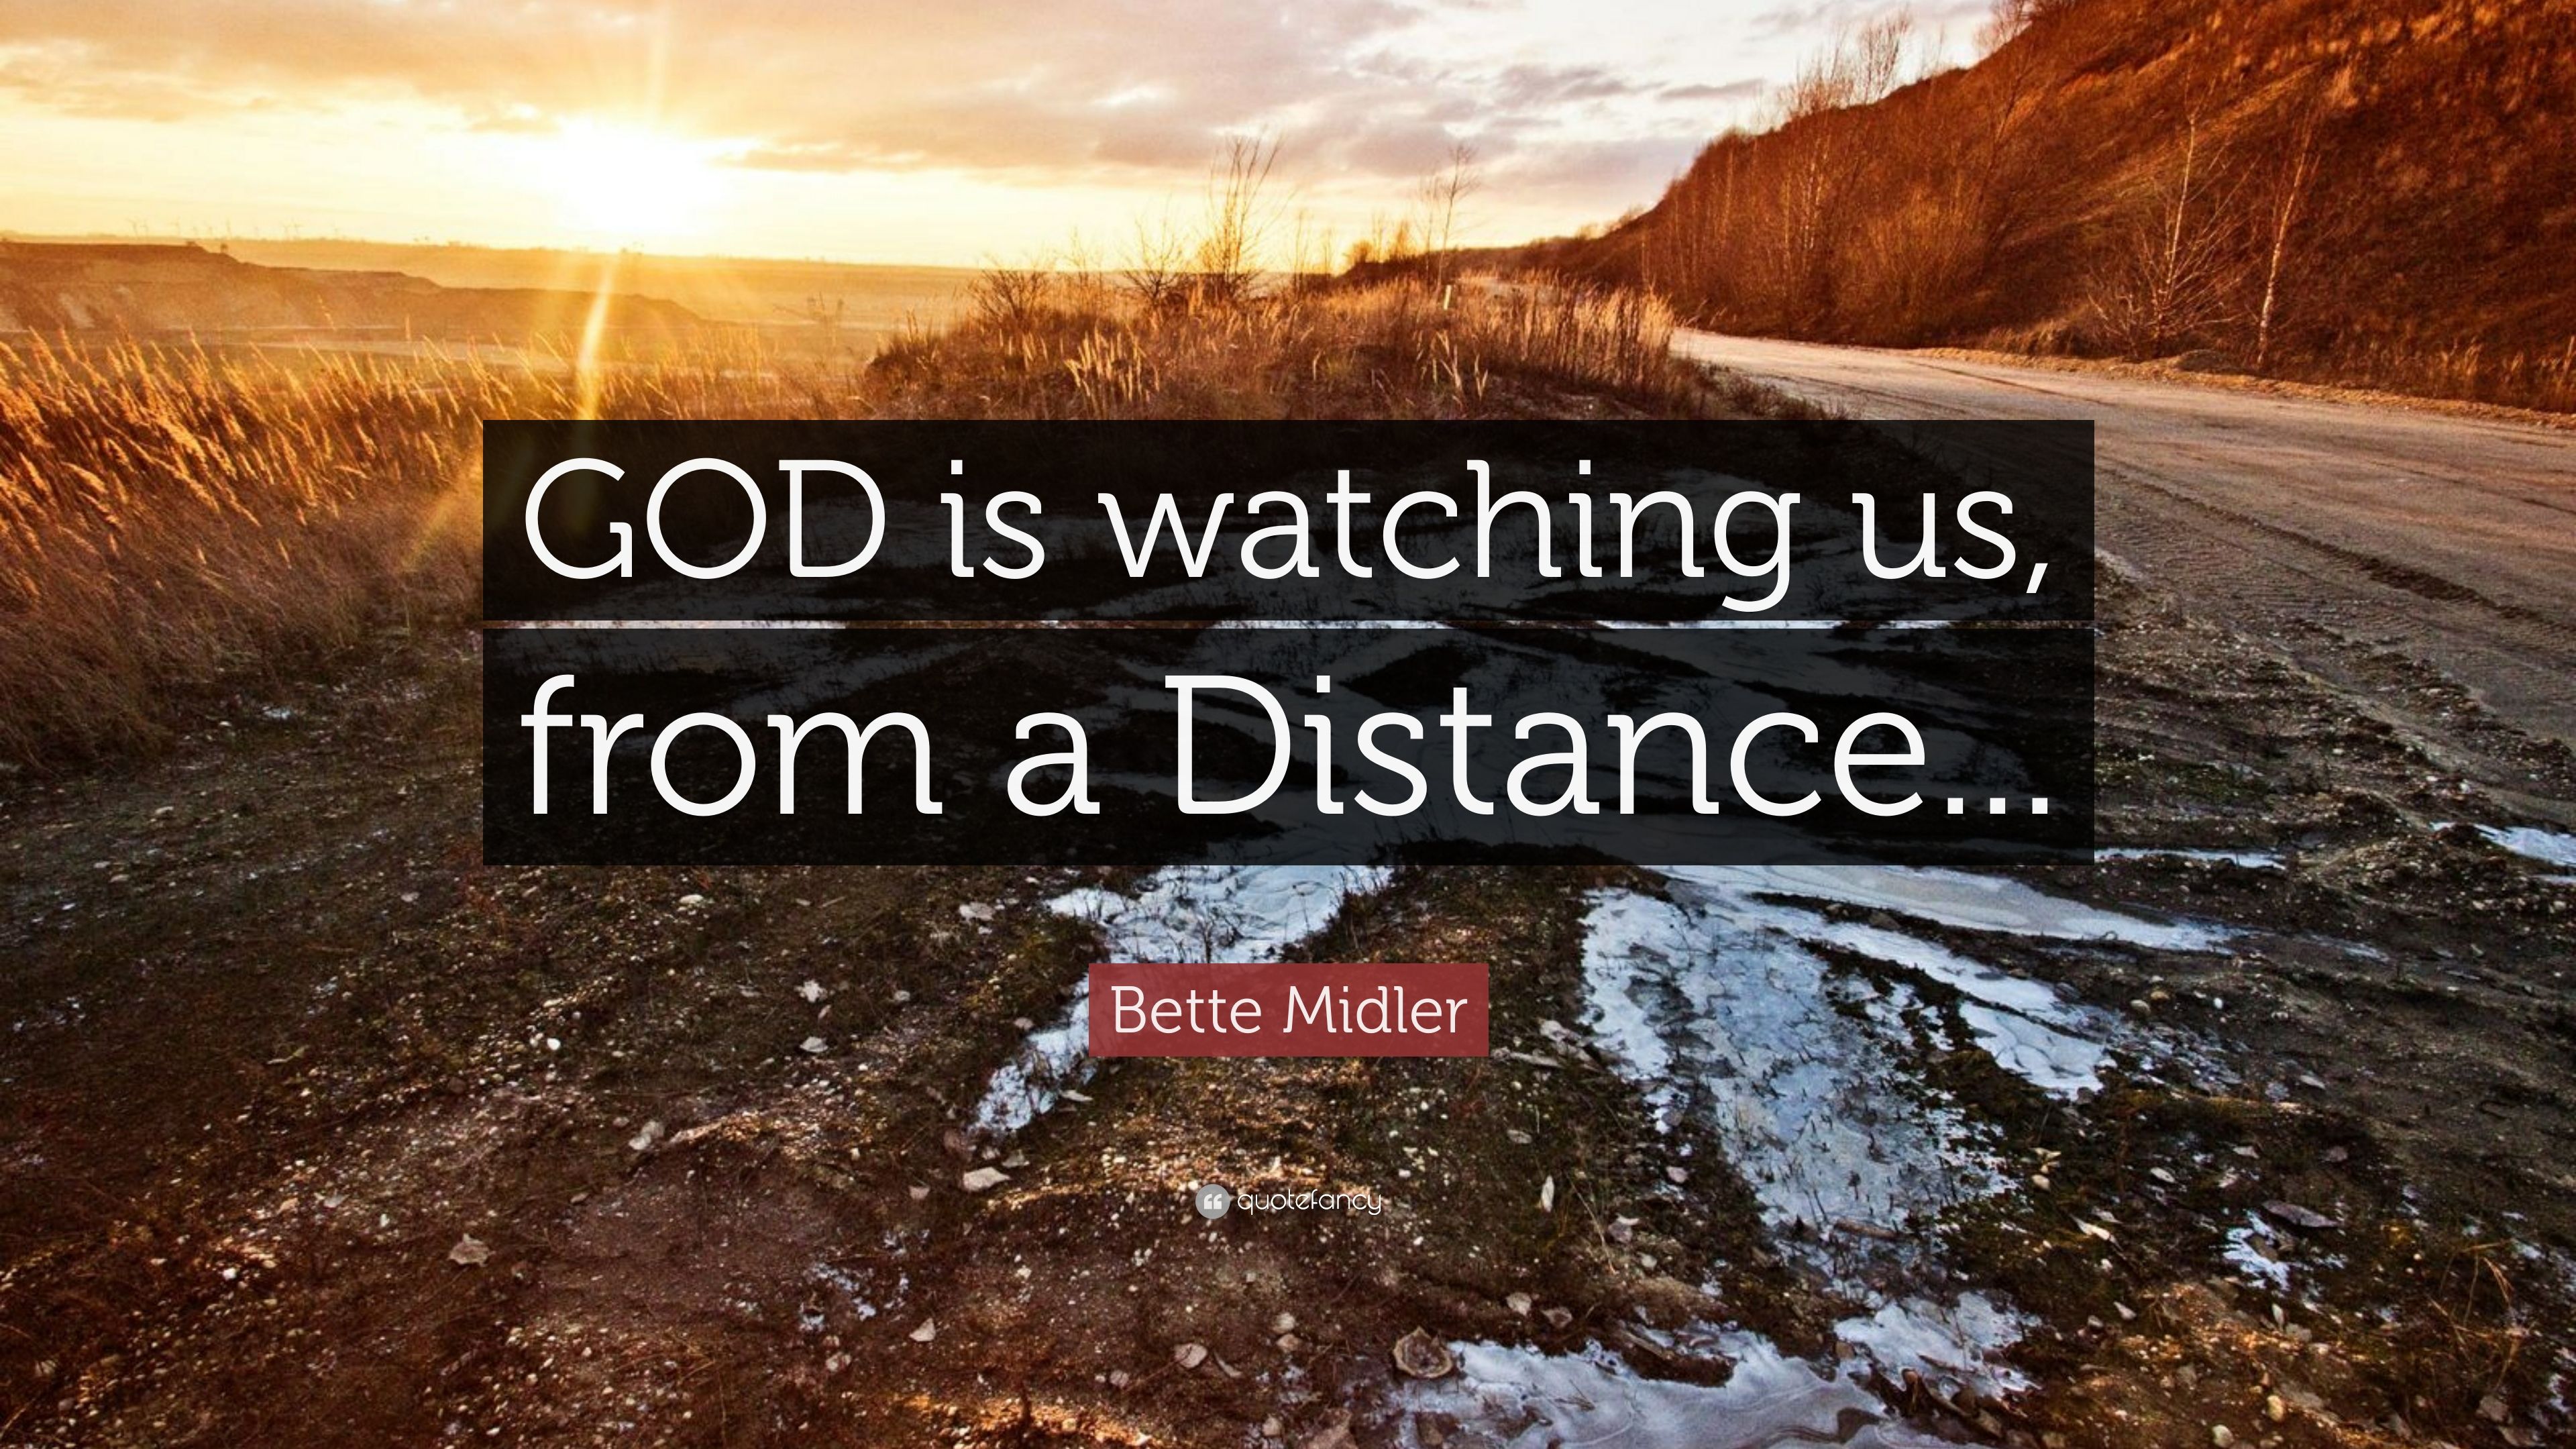 Bette Midler Quote: “GOD is watching us, from a Distance.” 11